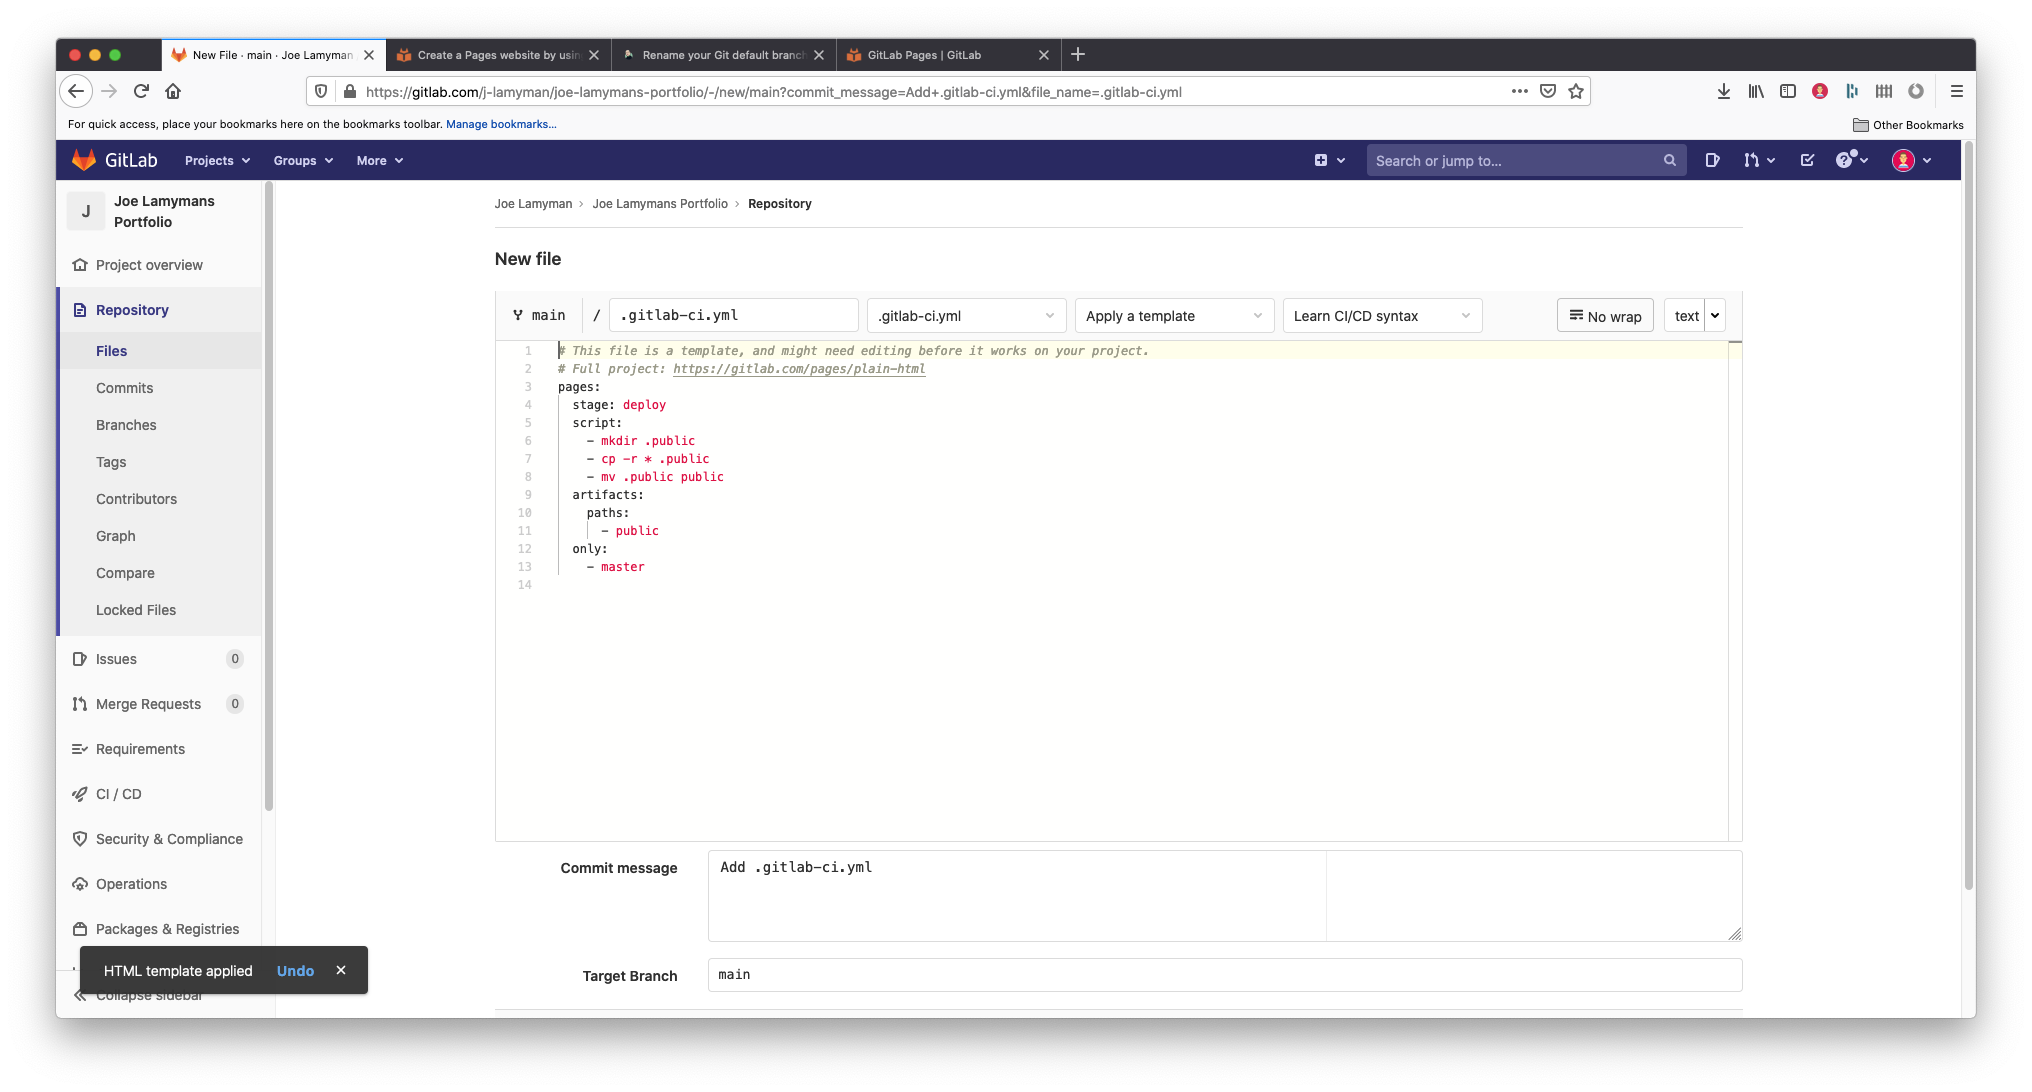 A screenshot of the Gitlab's 'New file' screen with the HTML template applied. The screen contains the same dropdowns along the top as in the previous screenshot. However, now that a HTML template was applied, there is YAML in the code editor on the page that has been automatically inserted. This YAML contains information like, stage: deploy, script: mkdir .public. At the bottom of the screenshot is a Commit message which is: 'Add .gitlab-ci.yml' and below that, the field target branch is set to main.